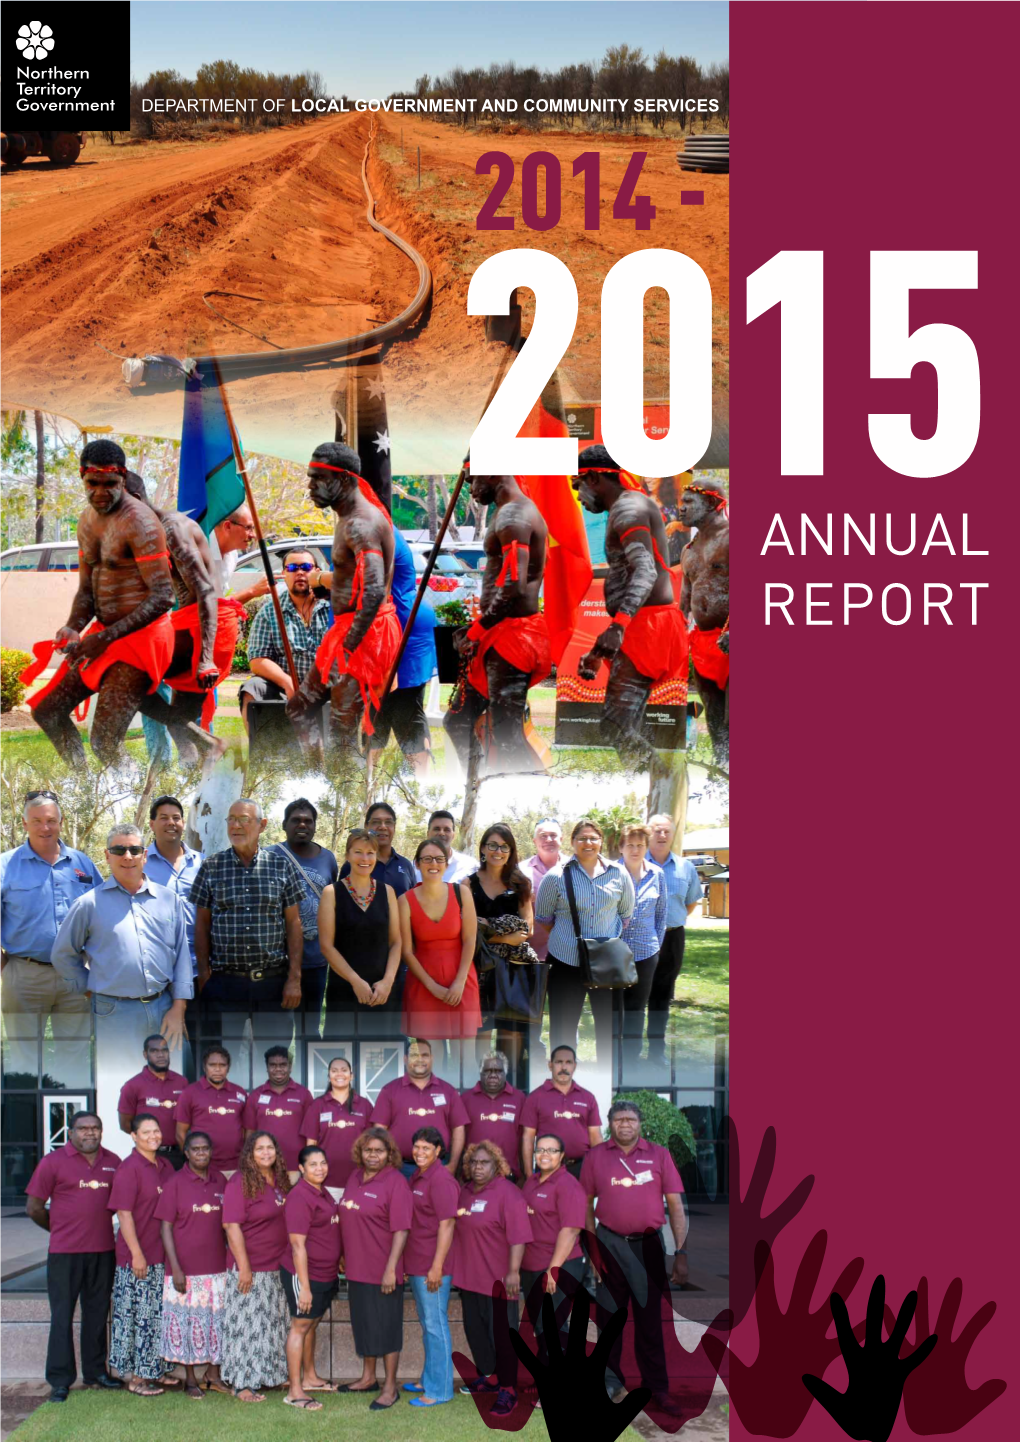 ANNUAL REPORT Published by the Department of Local Government and Community Services